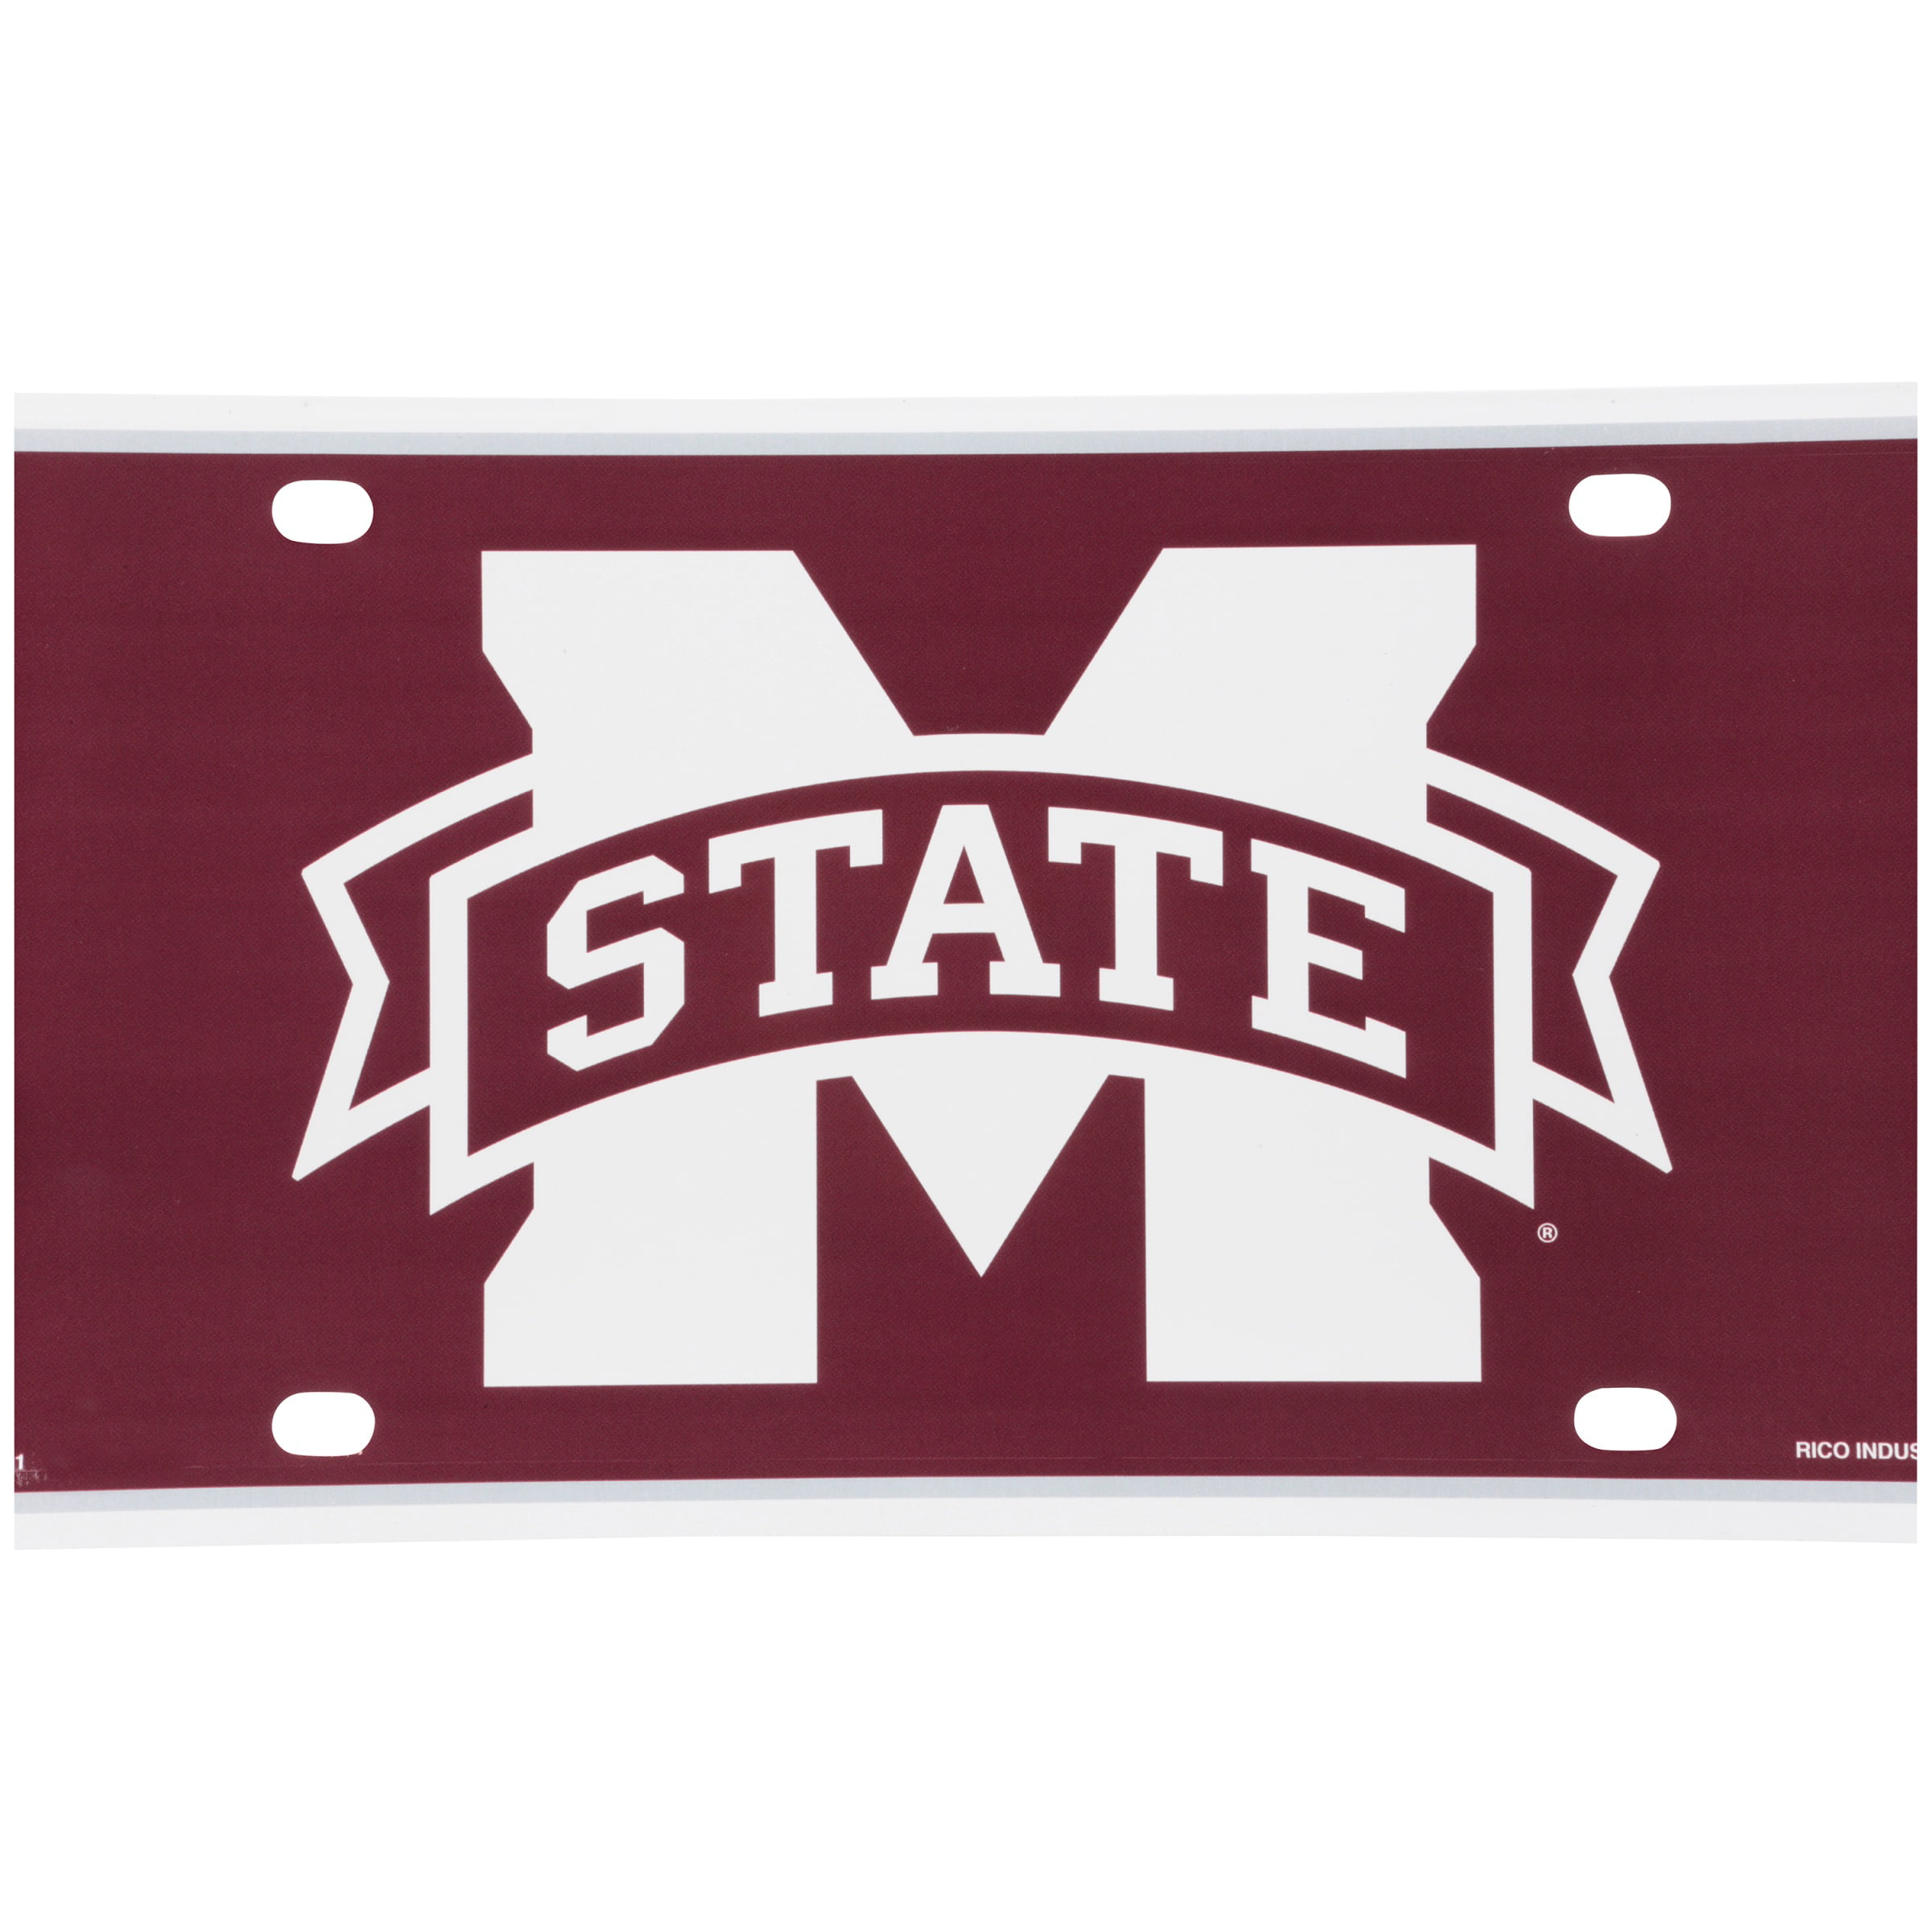 Mississippi state flag aluminum license plate car truck SUV tag 